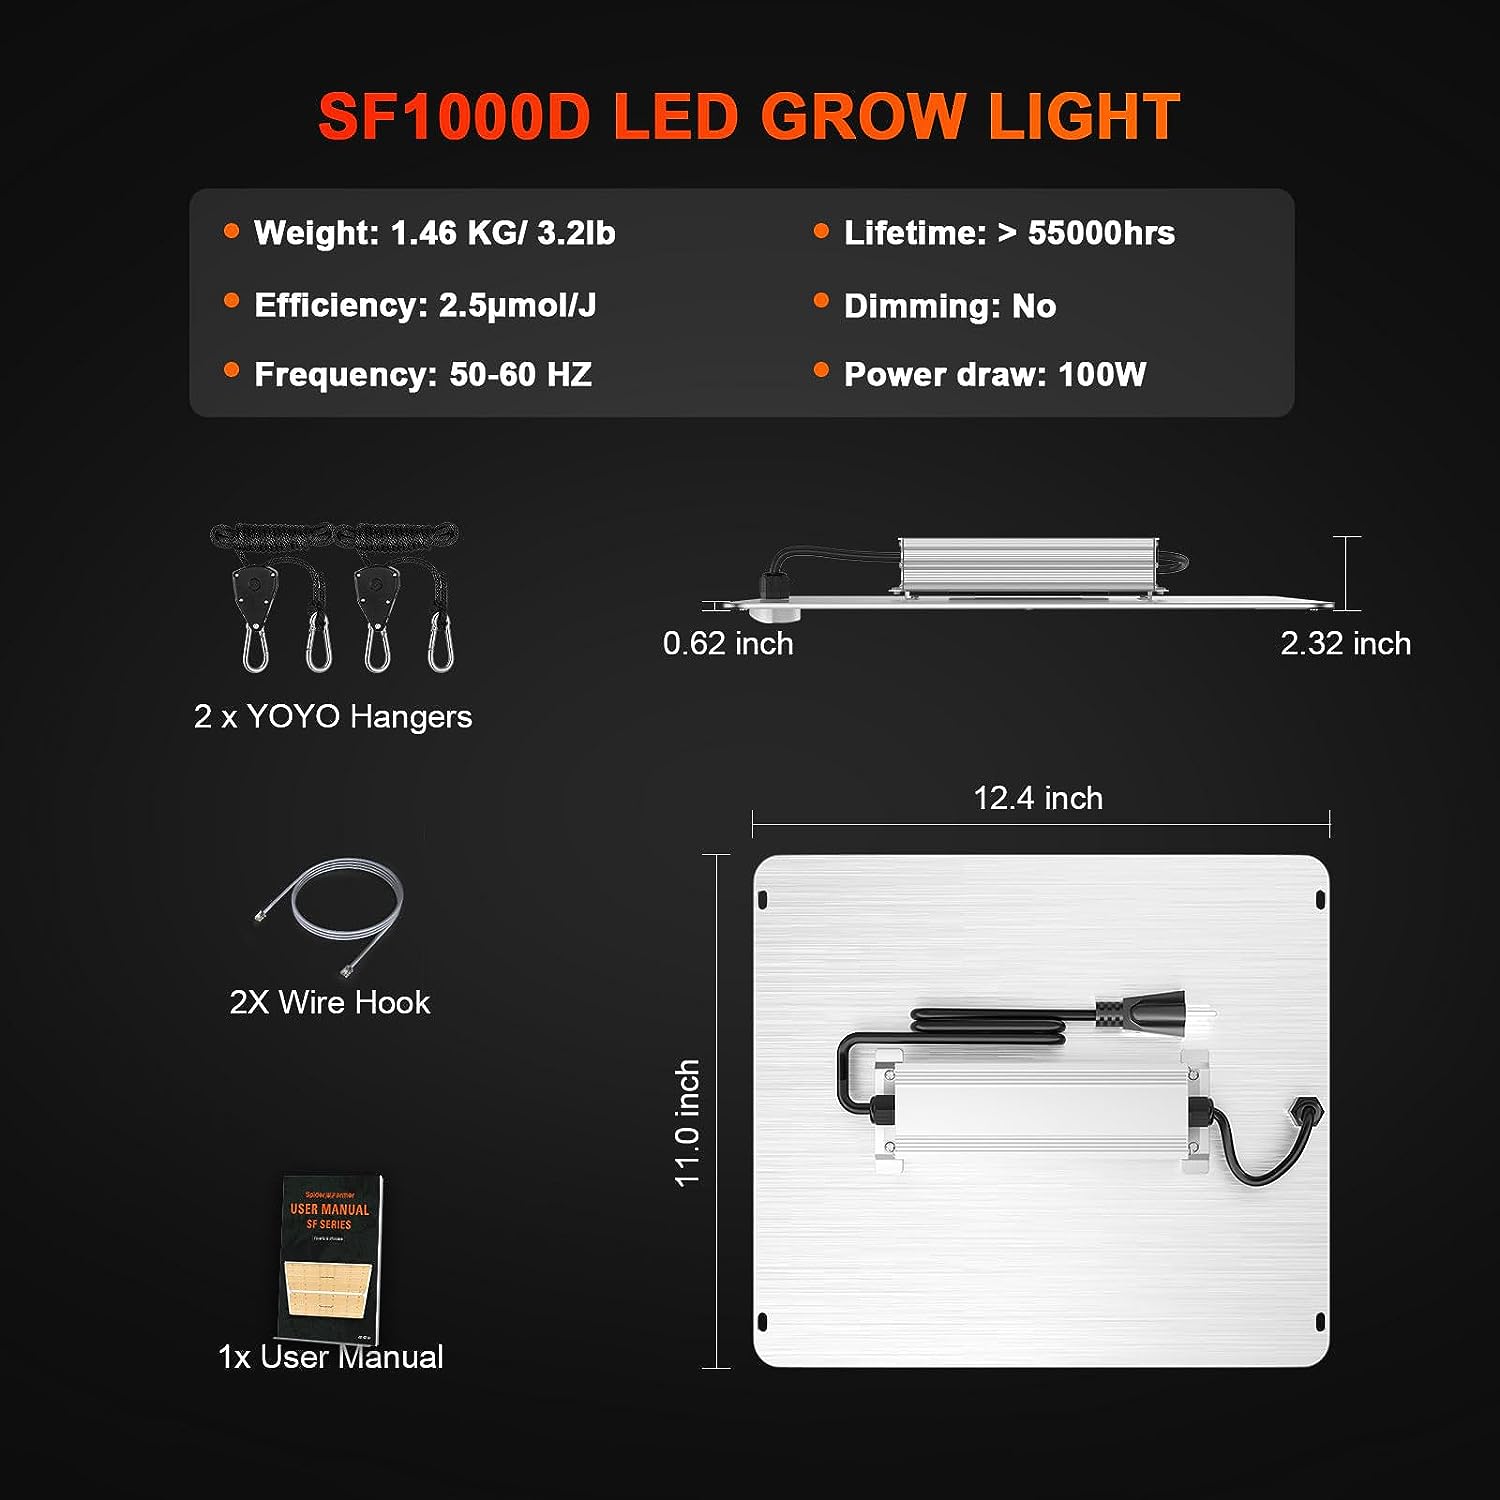 Spider Farmer 2023 Newest SF1000D LED Grow Light with Samsung LM301B Diodes Deeper Penetration  IR Lights Full Spectrum Growing Lamps for Indoor Plants Seedlings Vegetables Flowers 3x3/2x2 Grow Tent